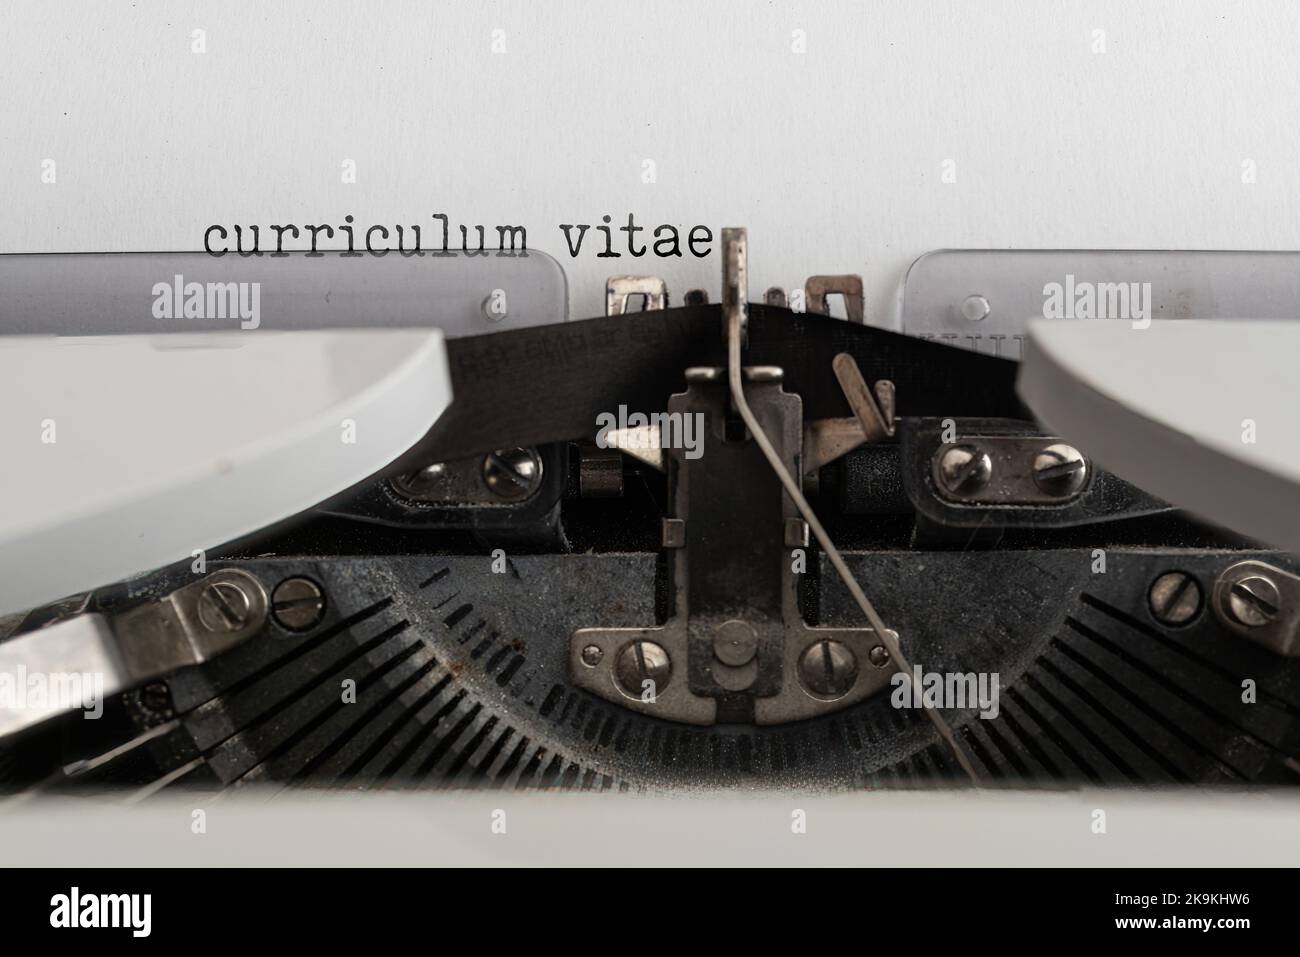 close-up of words CURRICULUM VITAE written on old mechanical typewriter Stock Photo